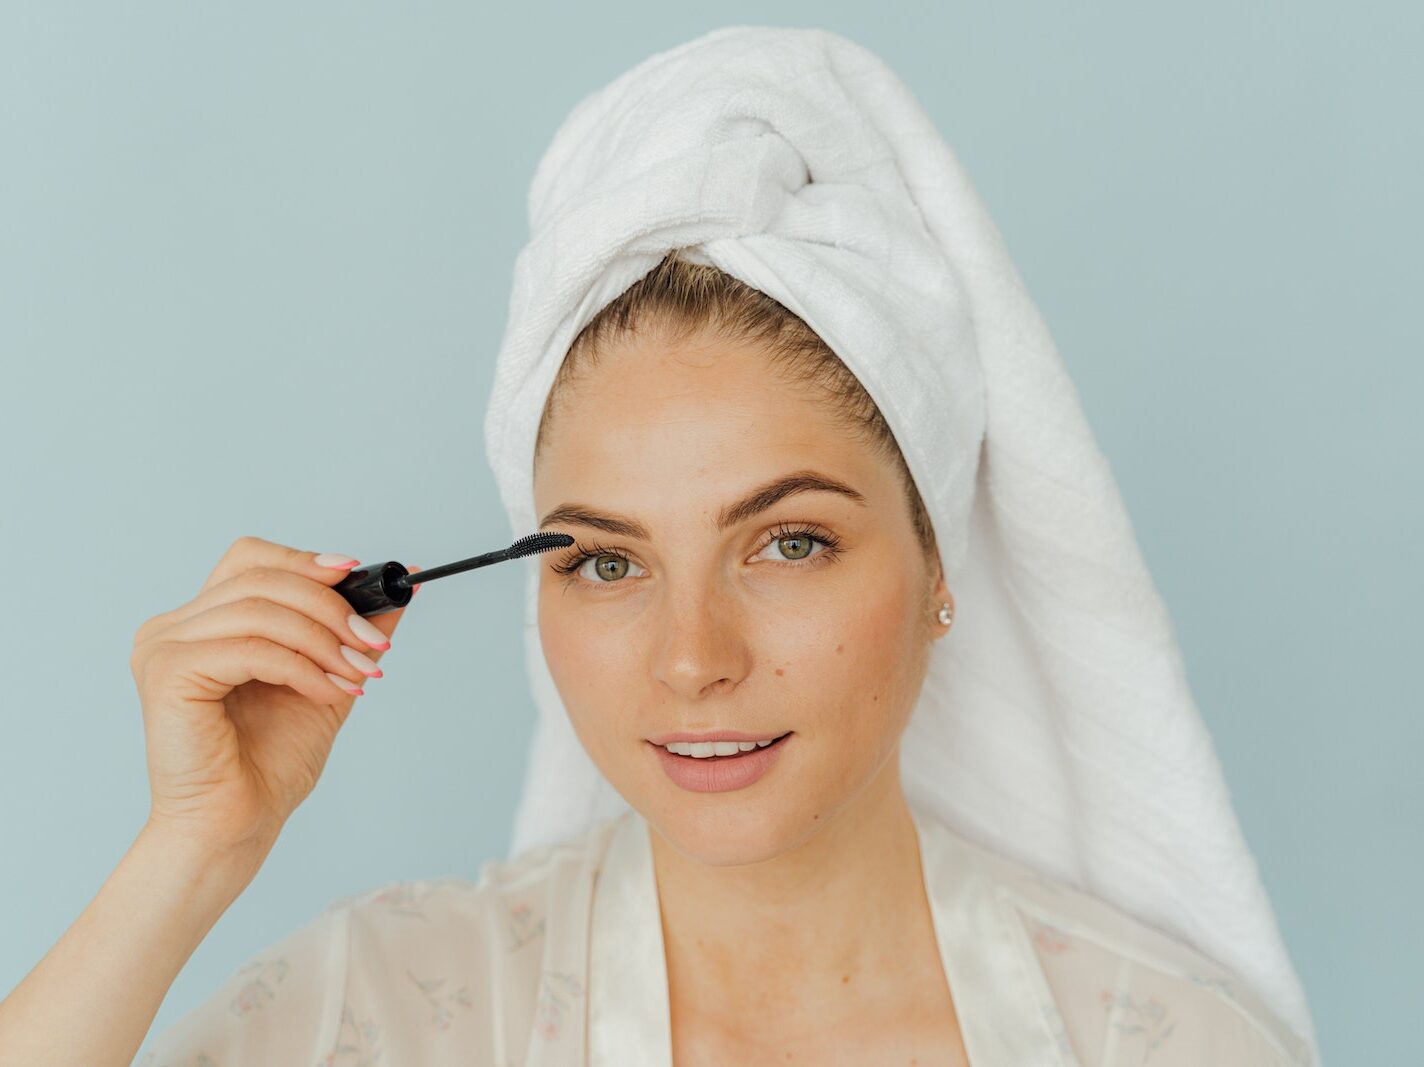 Woman in White Top and Head Towel Applying Mascara on Eyelashes